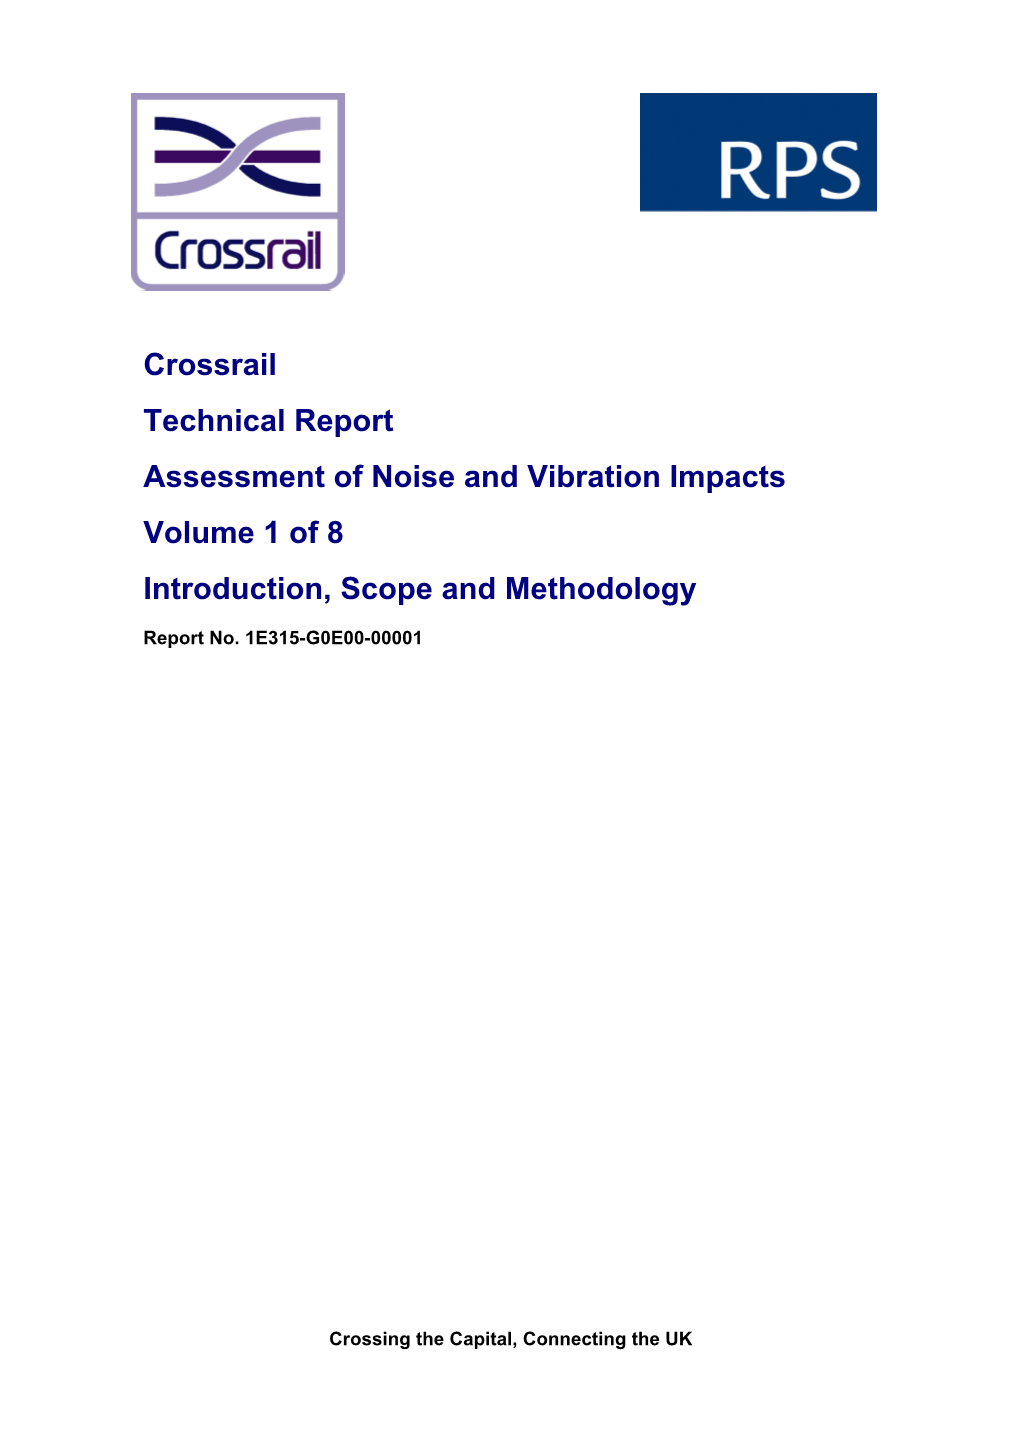 Crossrail Technical Report Assessment of Noise and Vibration Impacts Volume 1 of 8 Introduction, Scope and Methodology